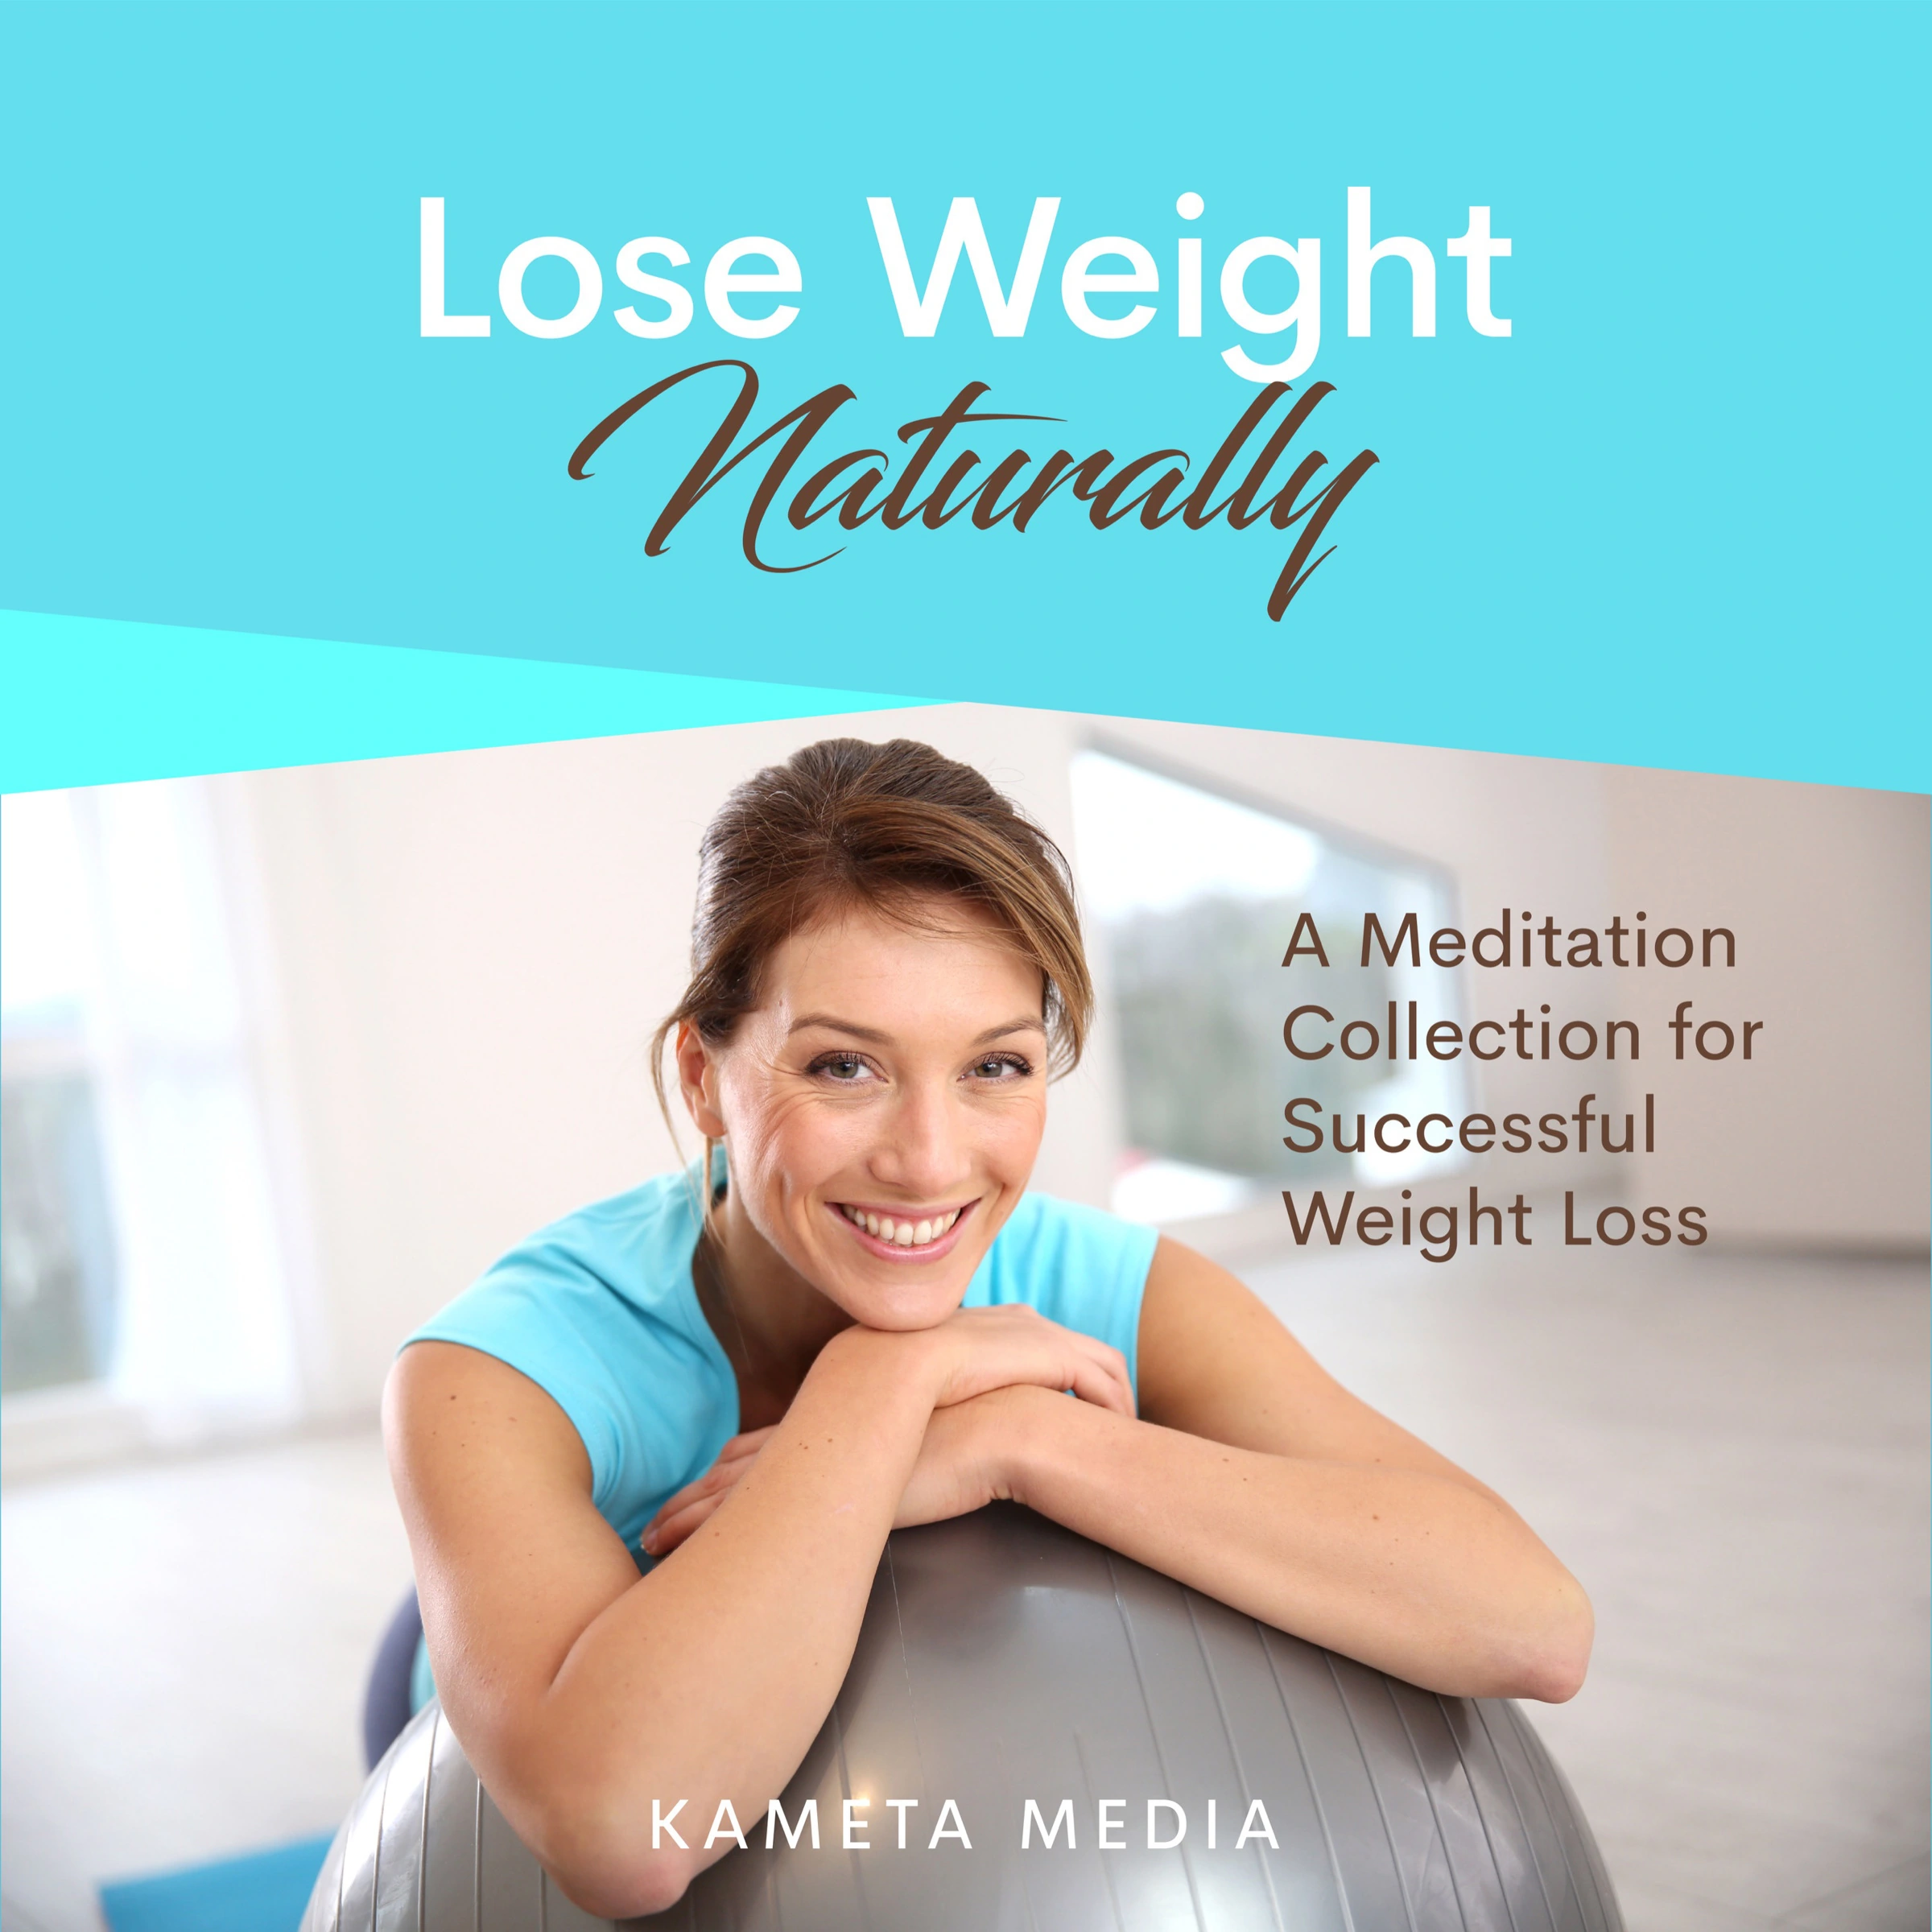 Lose Weight Naturally: A Meditation Collection for Successful Weight Loss Audiobook by Kameta Media